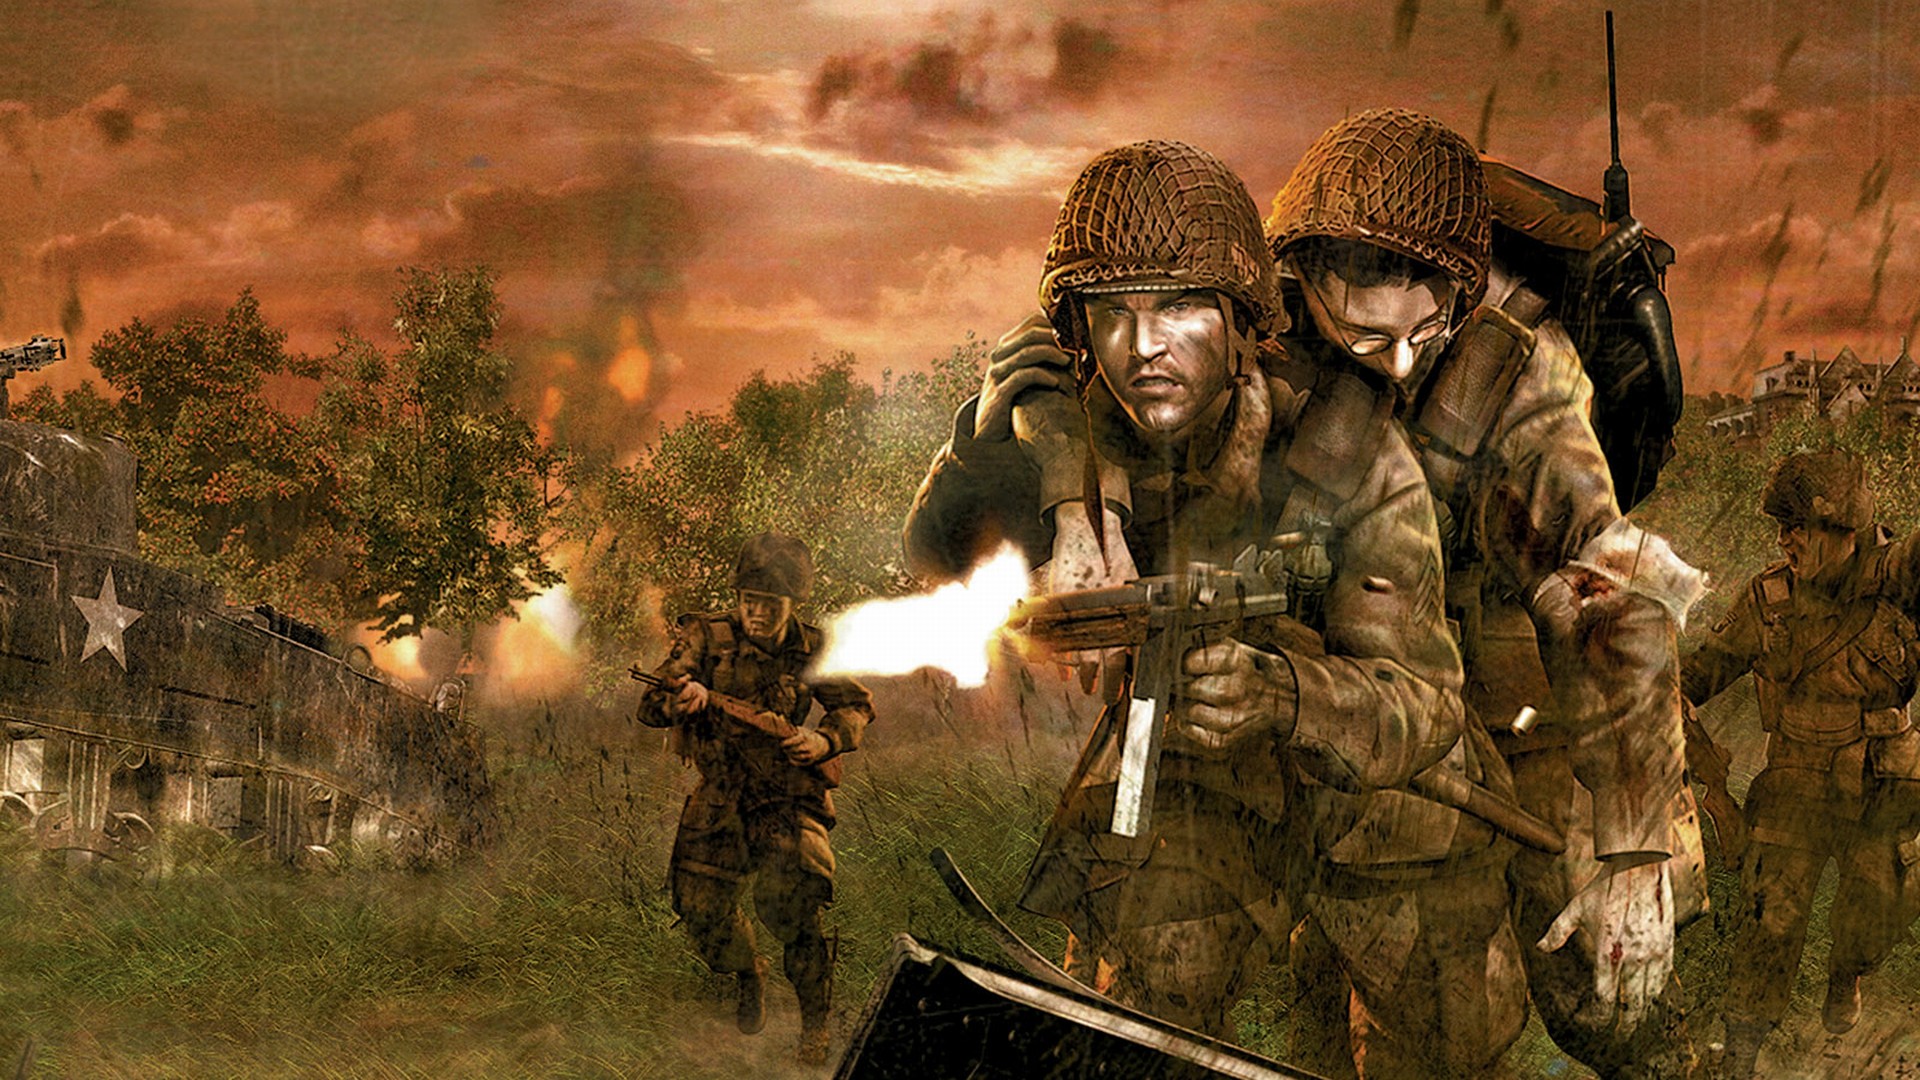 Video Game Brothers in Arms: Road to Hill 30 HD Wallpaper | Background Image